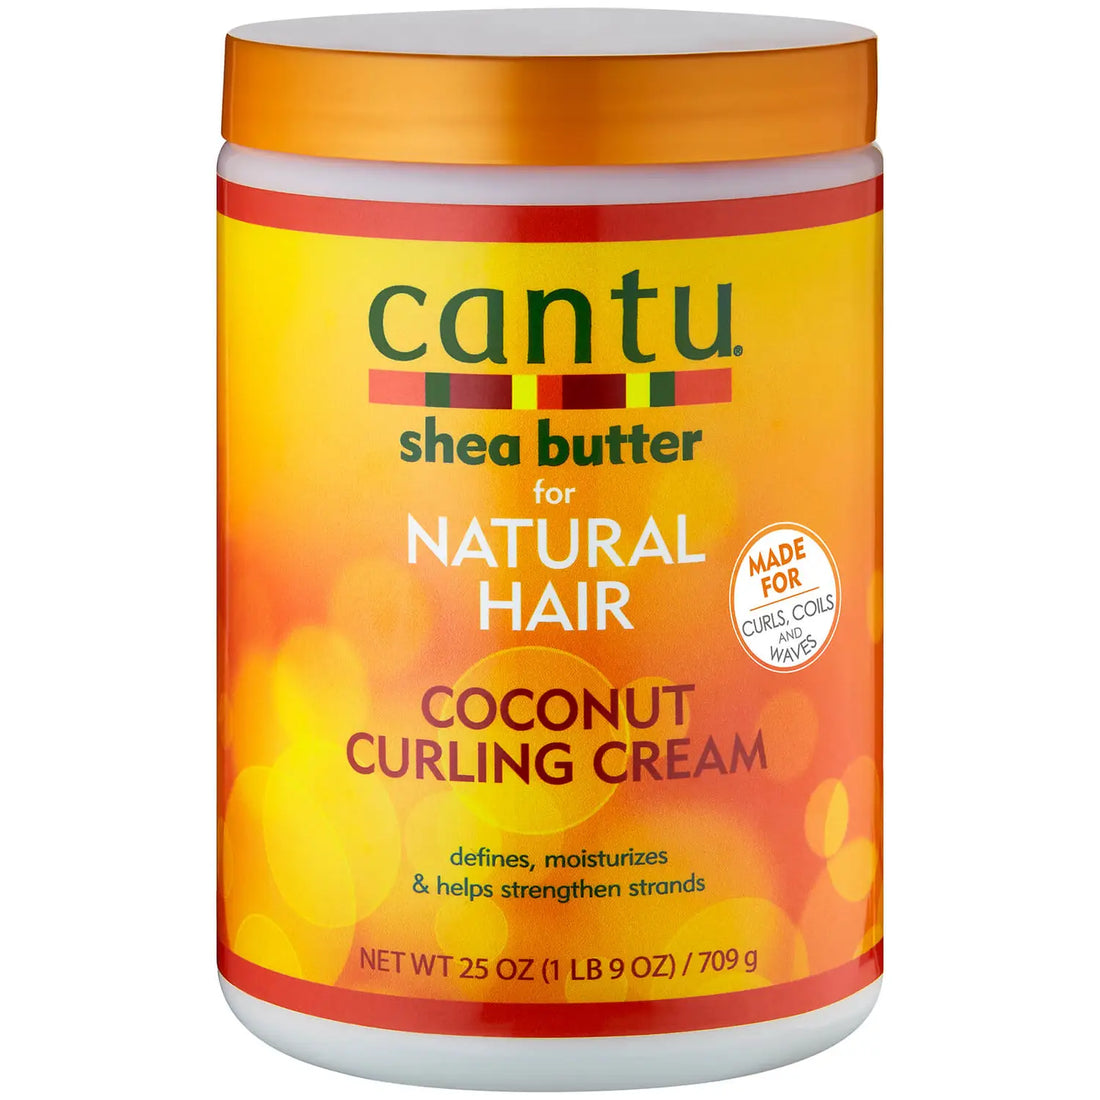 Cantu Shea Butter for Natural Hair Coconut Curling Cream 709g